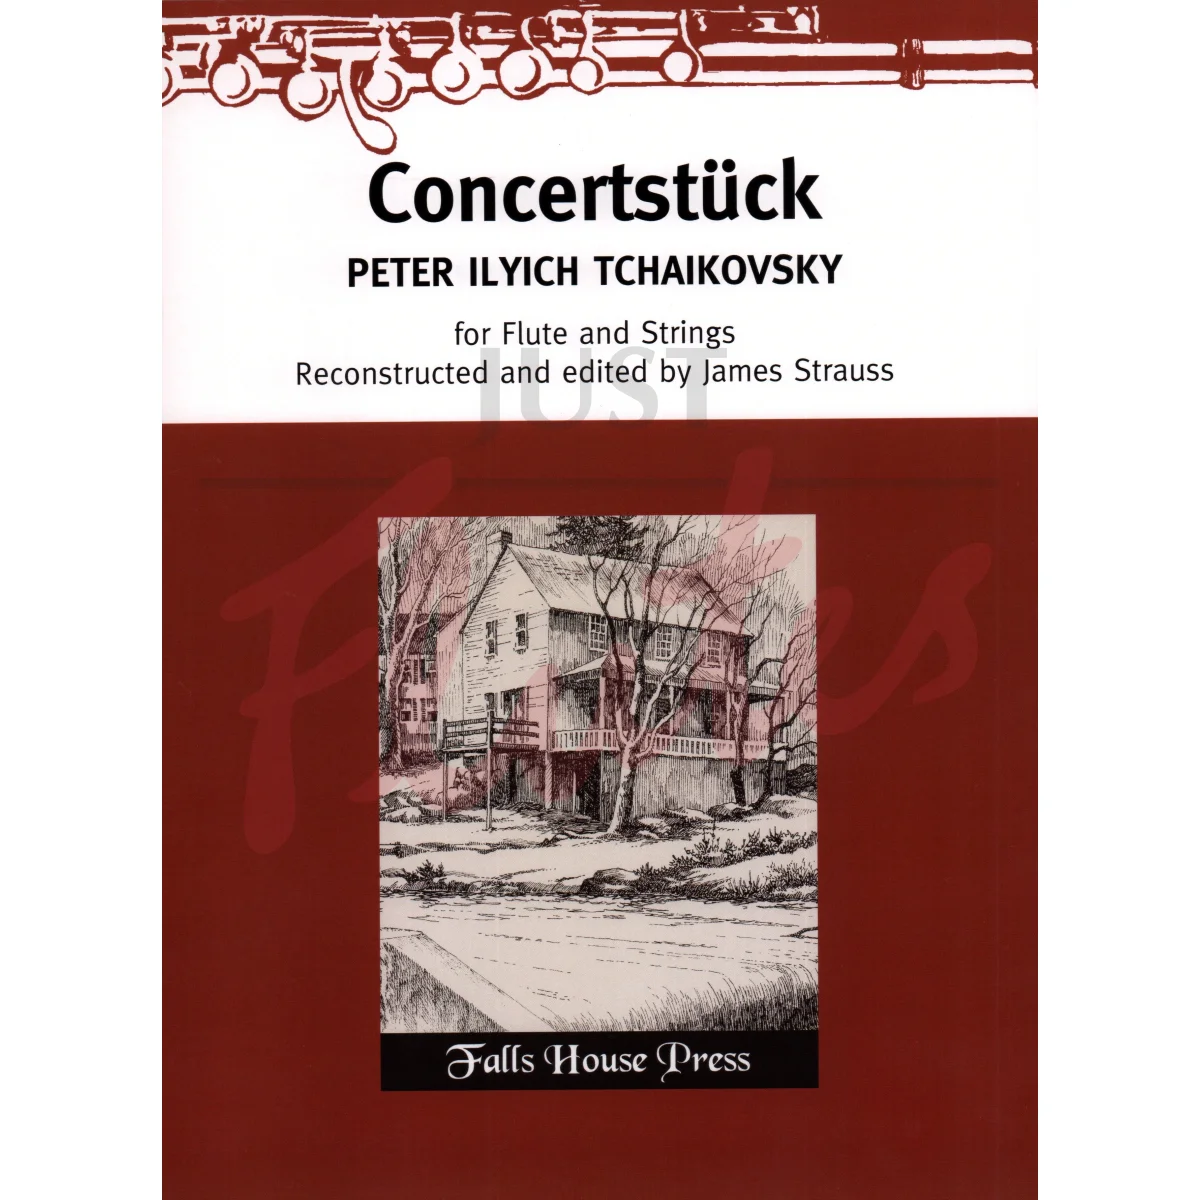 Concertstück for Flute and Strings 